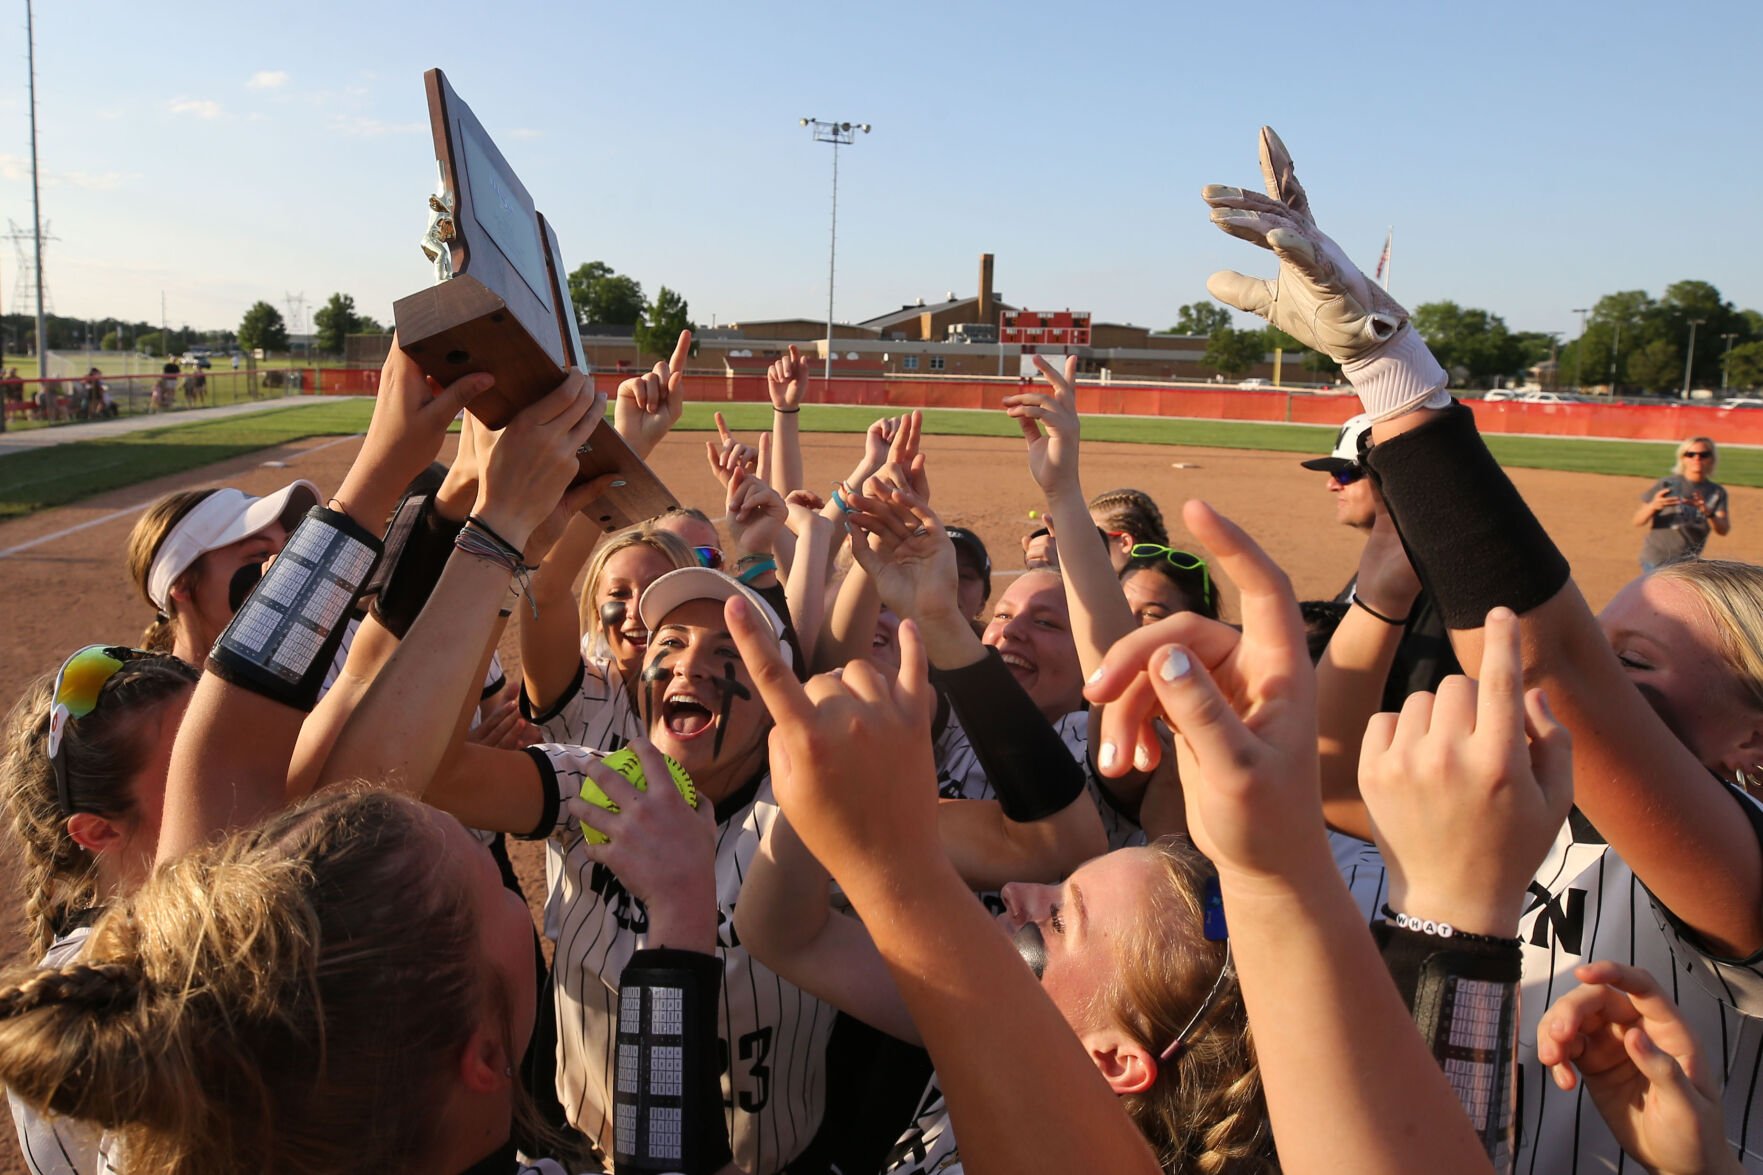 Western Softball Team Wins 2nd Consecutive Sectional Title in Intense Match vs West Lafayette